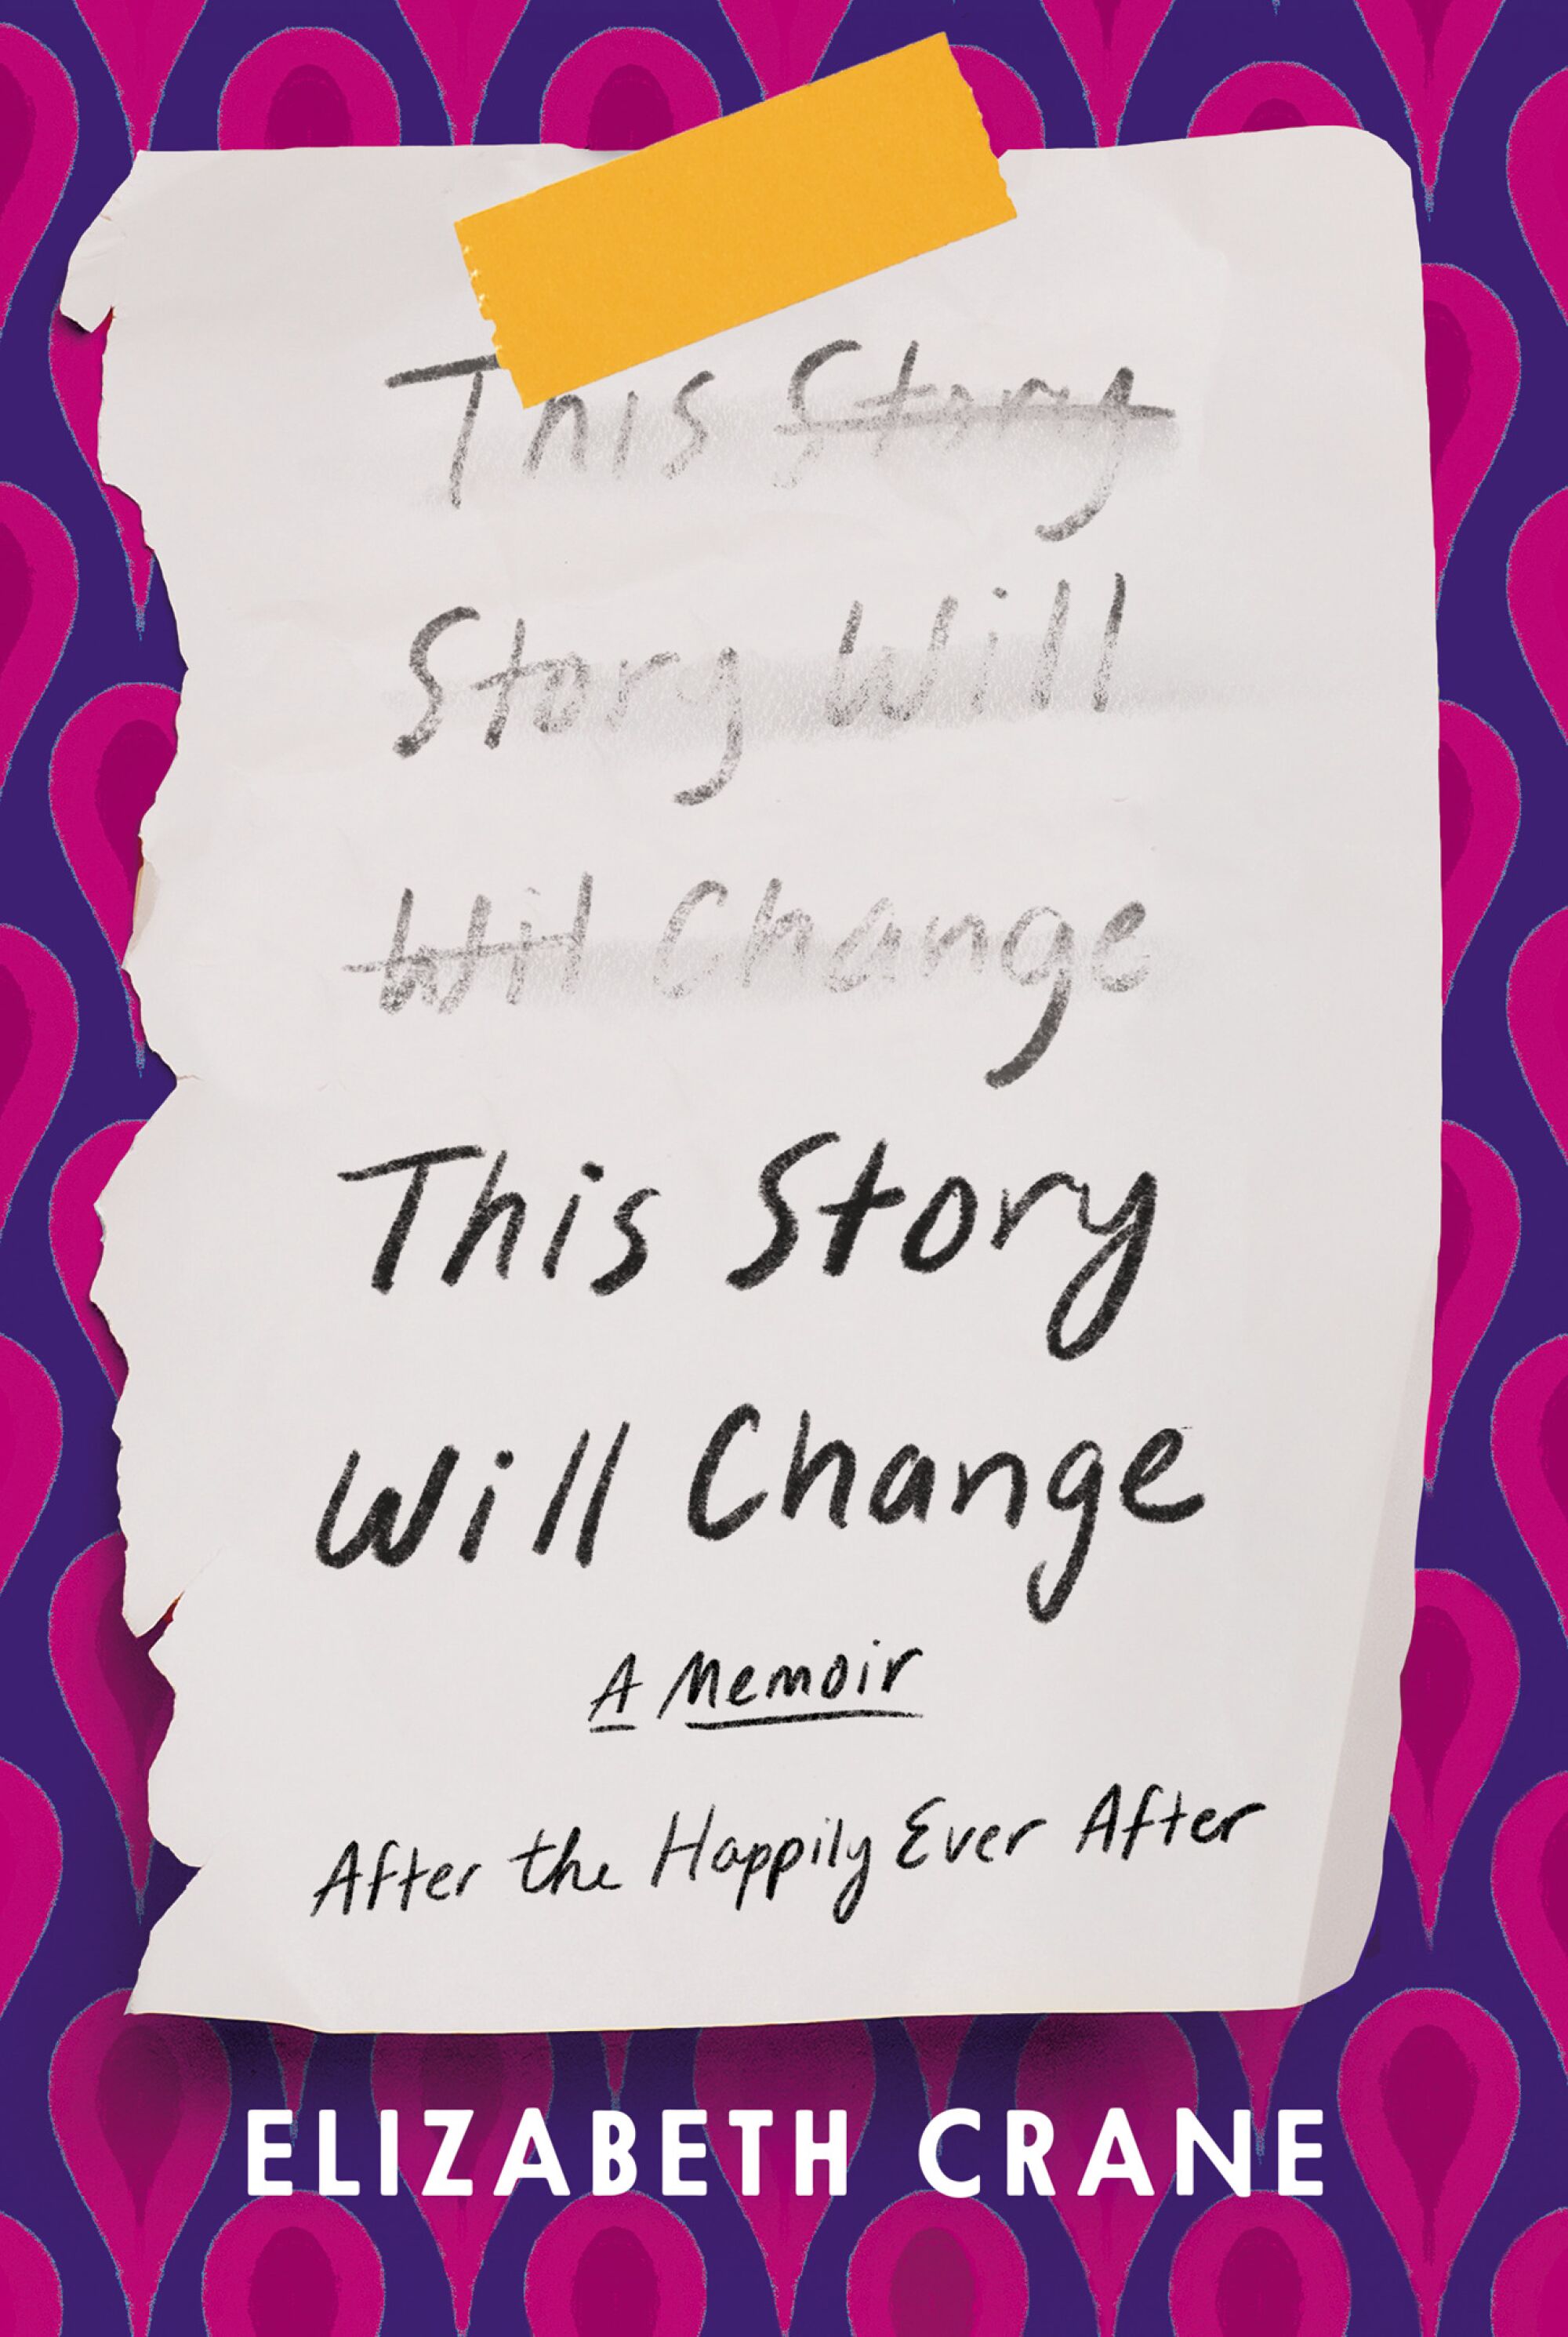 "The Story Will Change: After the Happily Ever After" by Elizabeth Crane